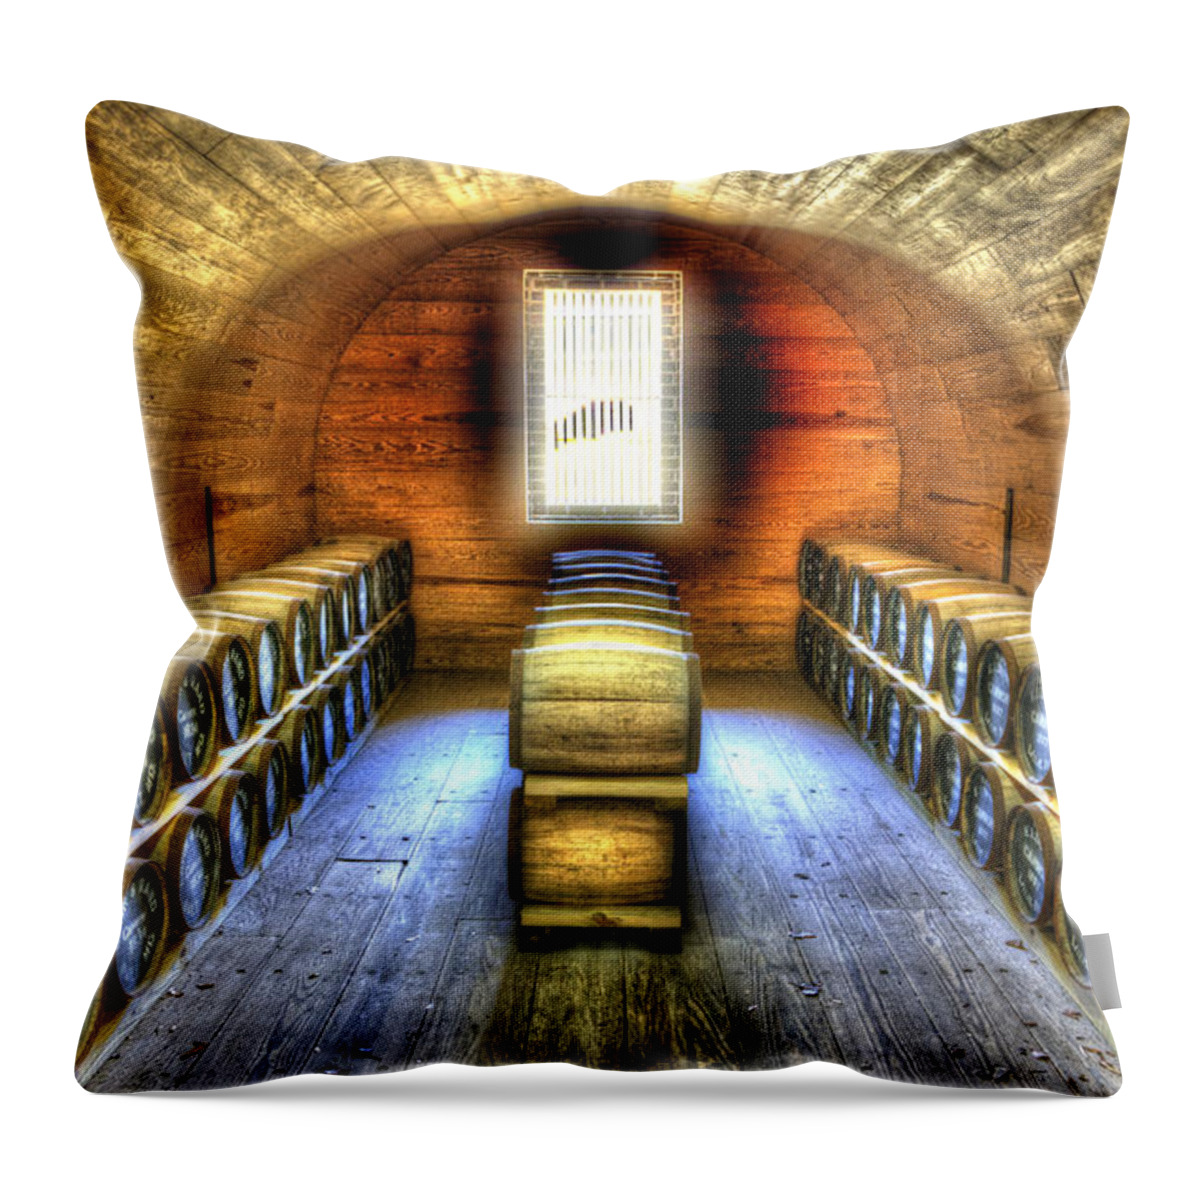 Powder Room Throw Pillow featuring the photograph Powder Room by Dale Powell